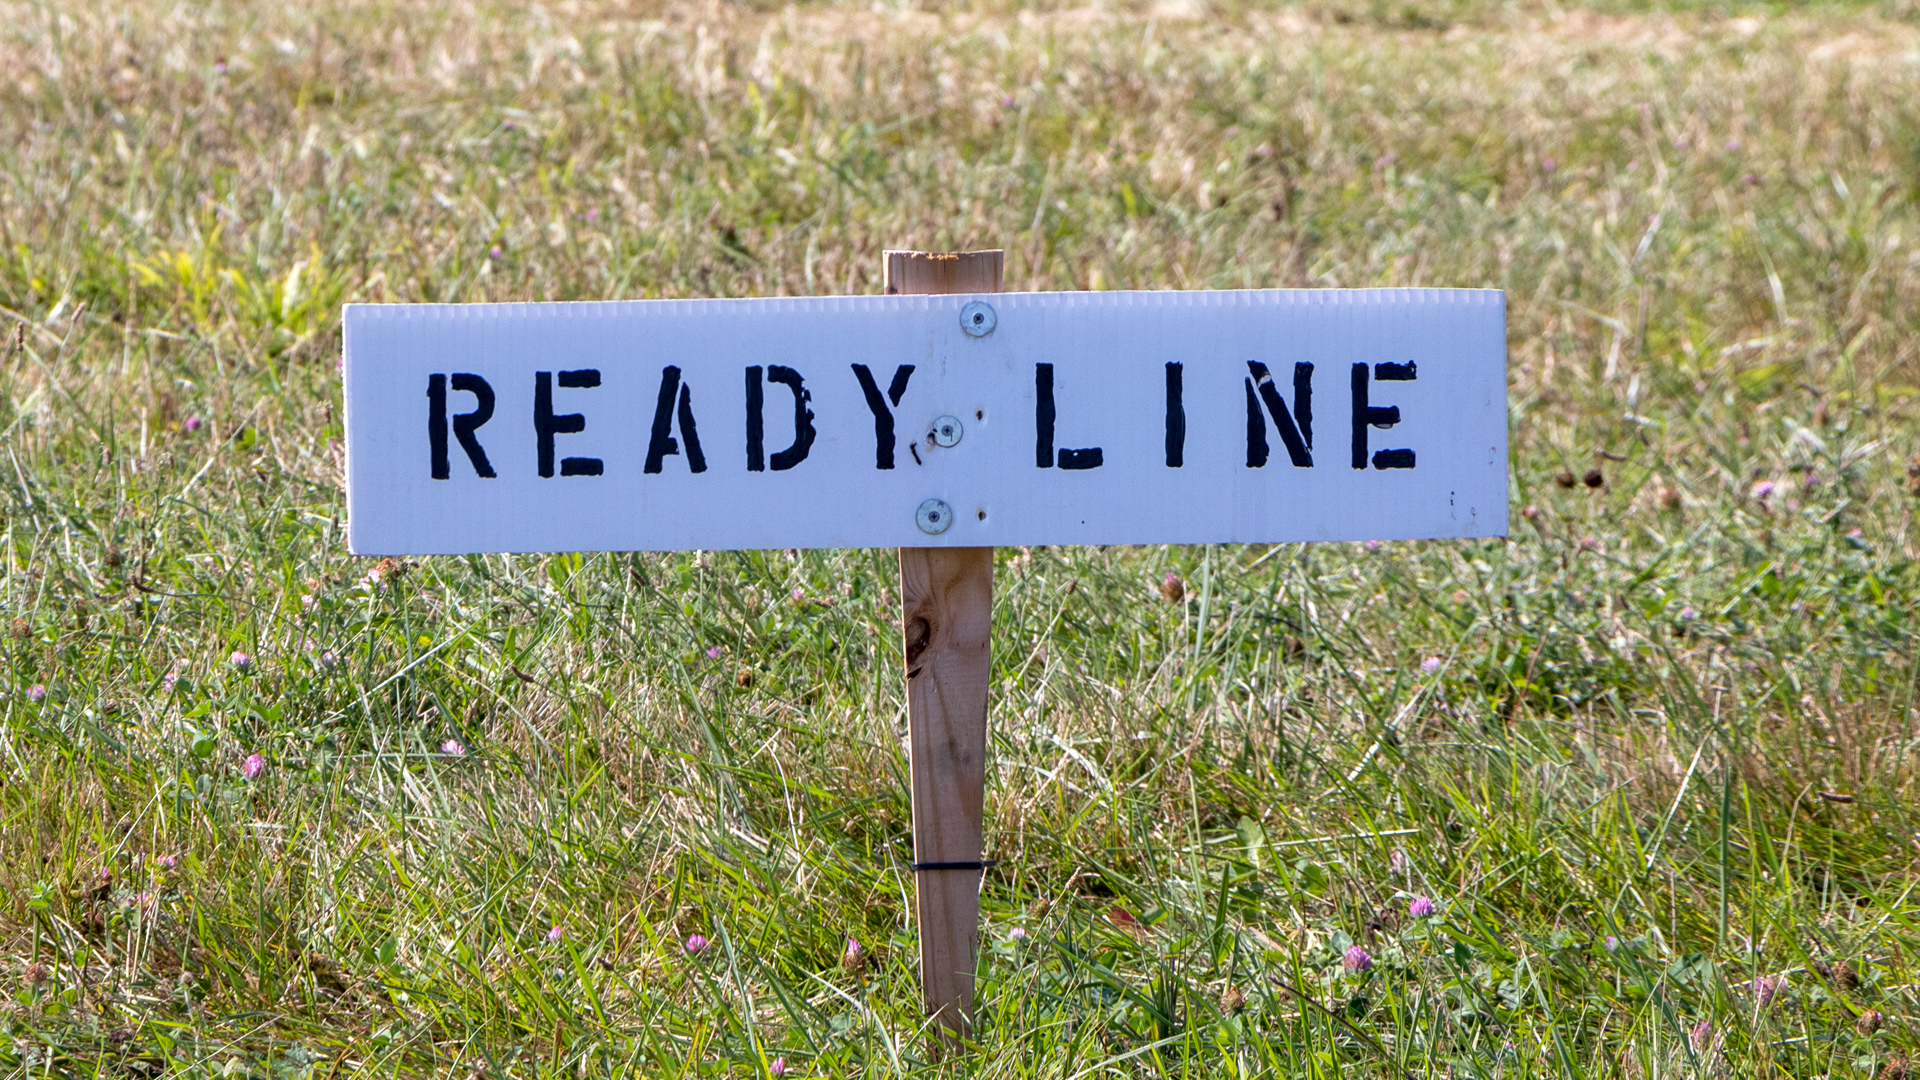 Camp Atterbury Ready Line sign